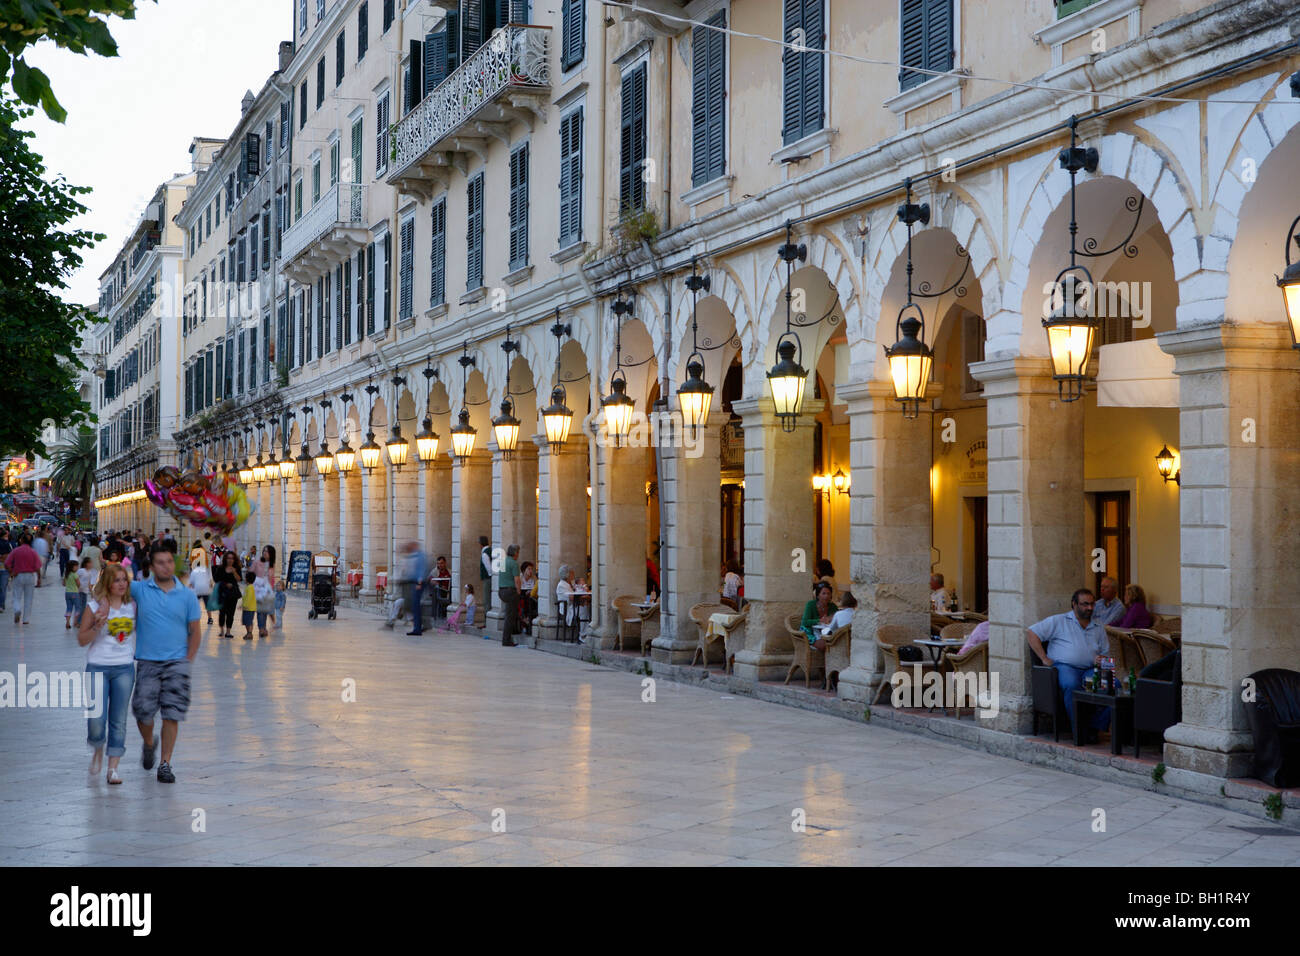 People walking through the town and sitting in cafes under the arcades of Liston, Corfu, Ionian Islands, Greece Stock Photo